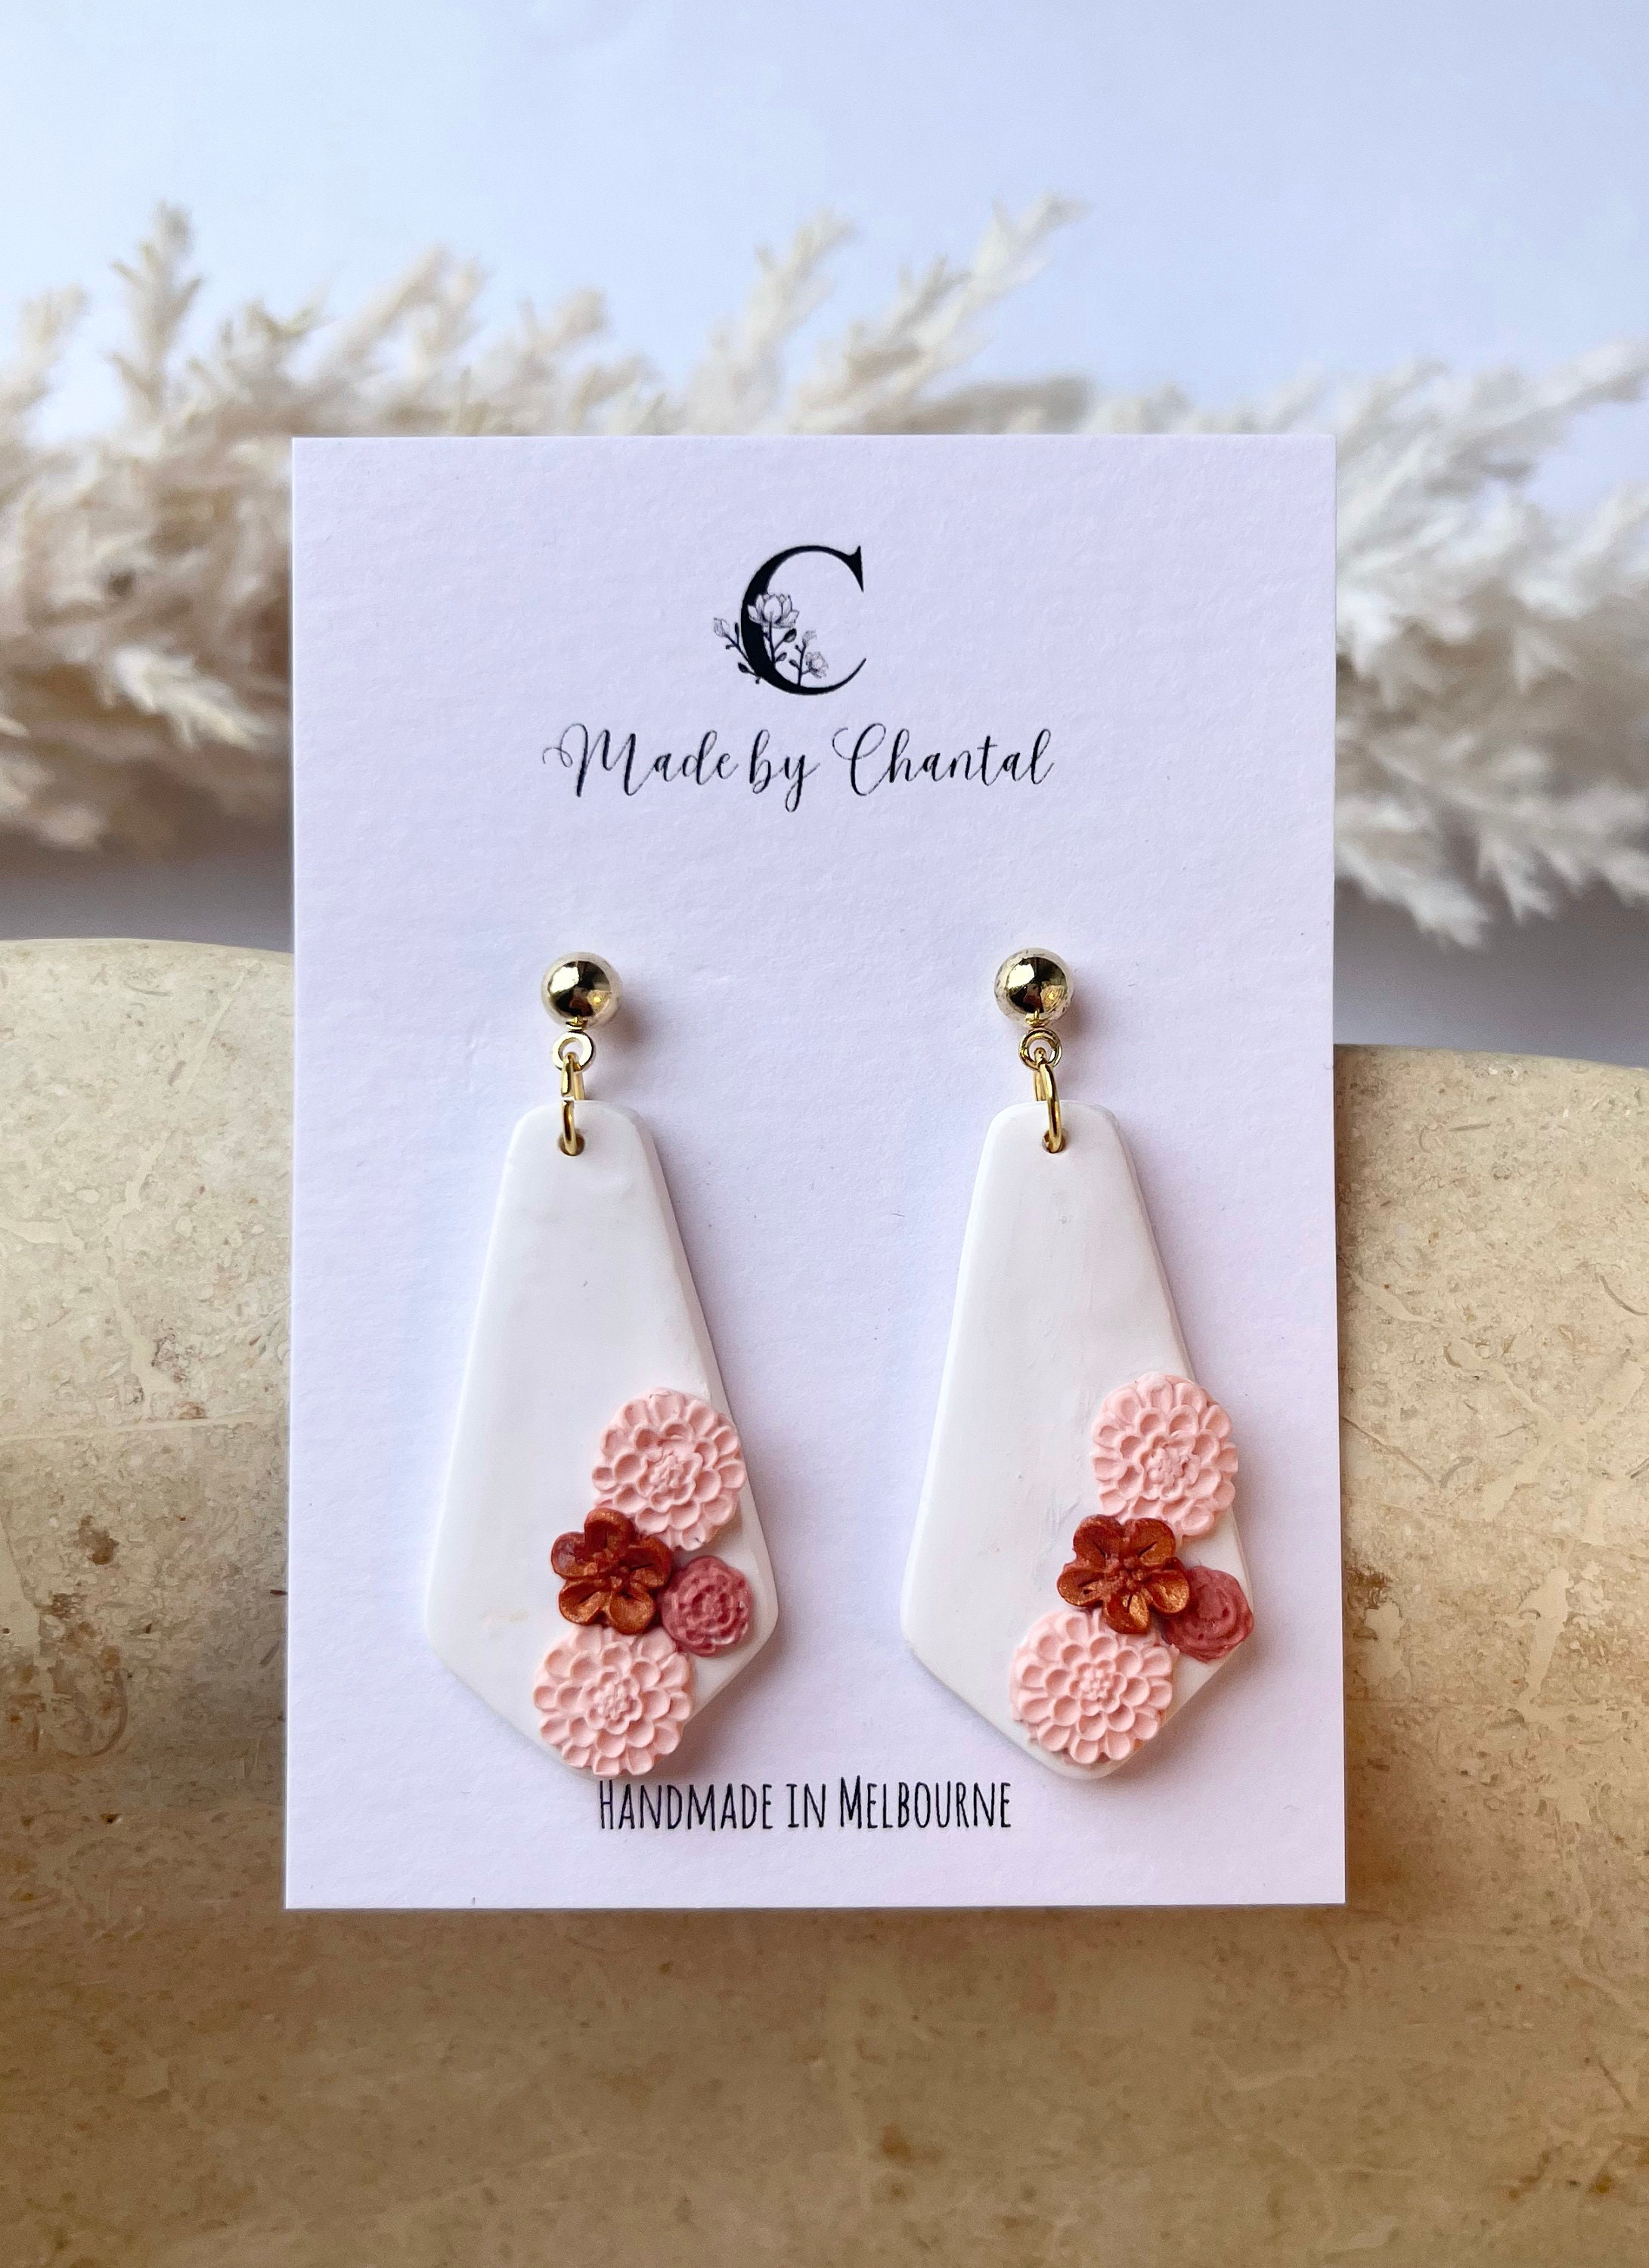 Handmade Polymer Clay Earrings, Floral Earrings, Dangle Earrings, White Clay  Earrings, Wood Earrings, Flowers, Gift for Her, Gift Idea